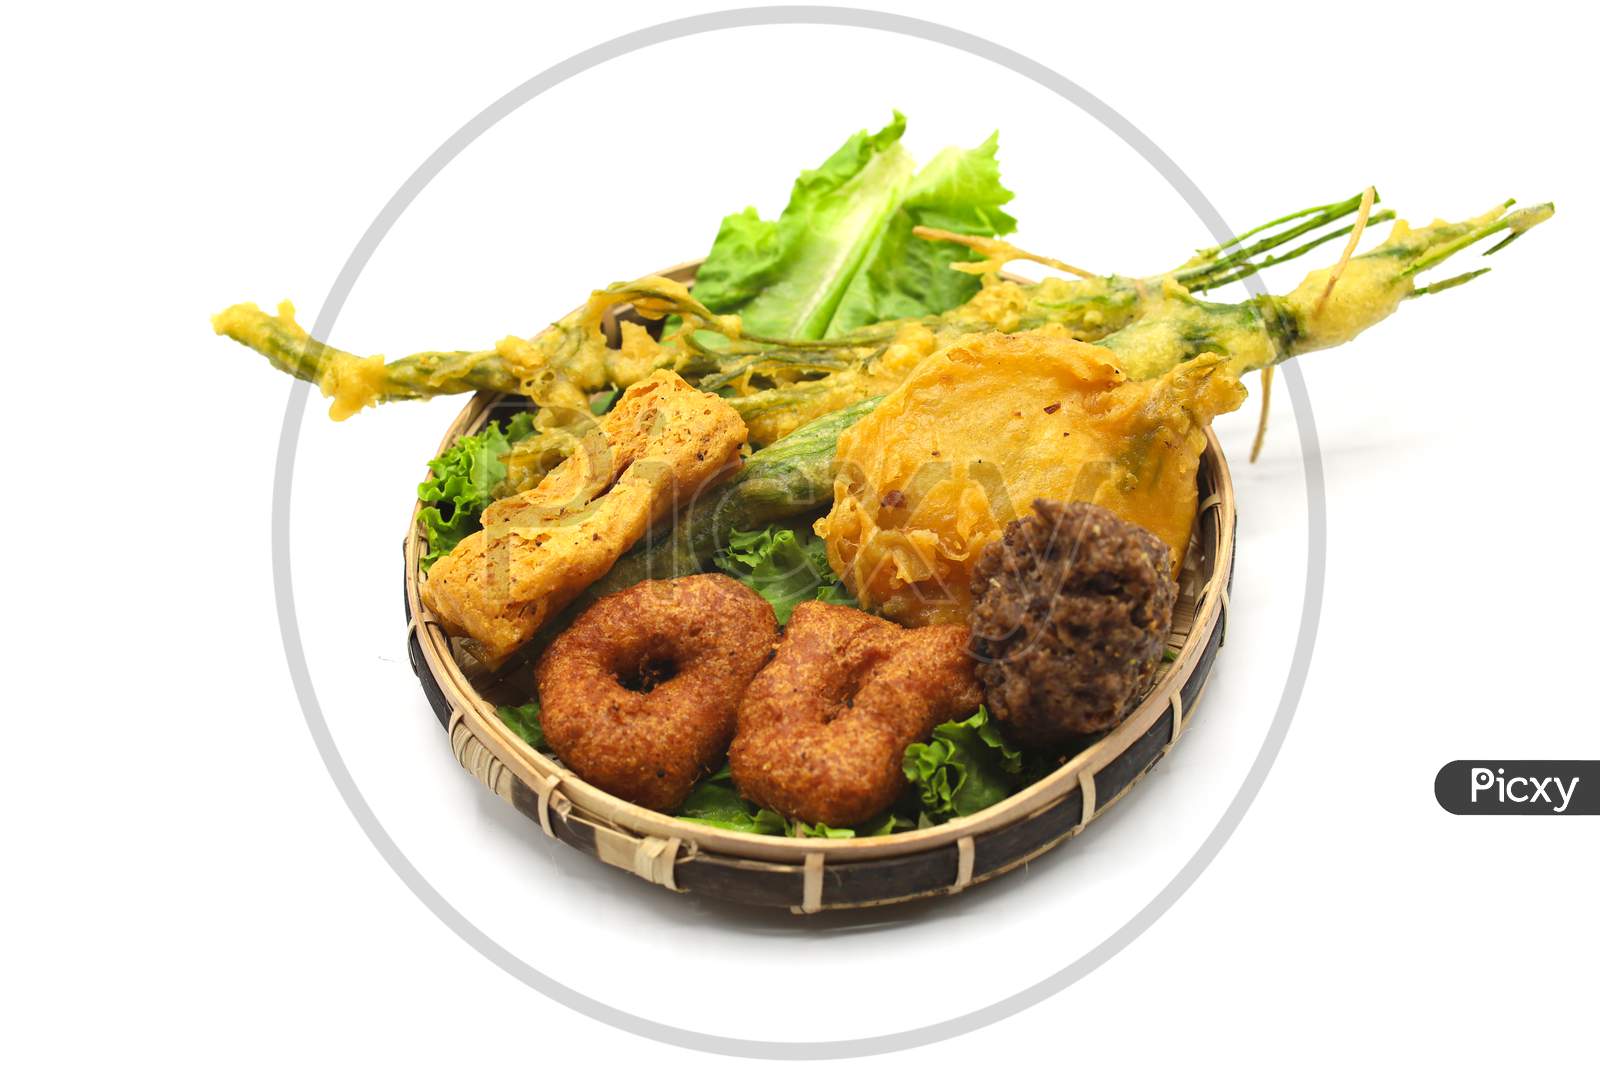 Burmese Dish served in a Plate with White Background